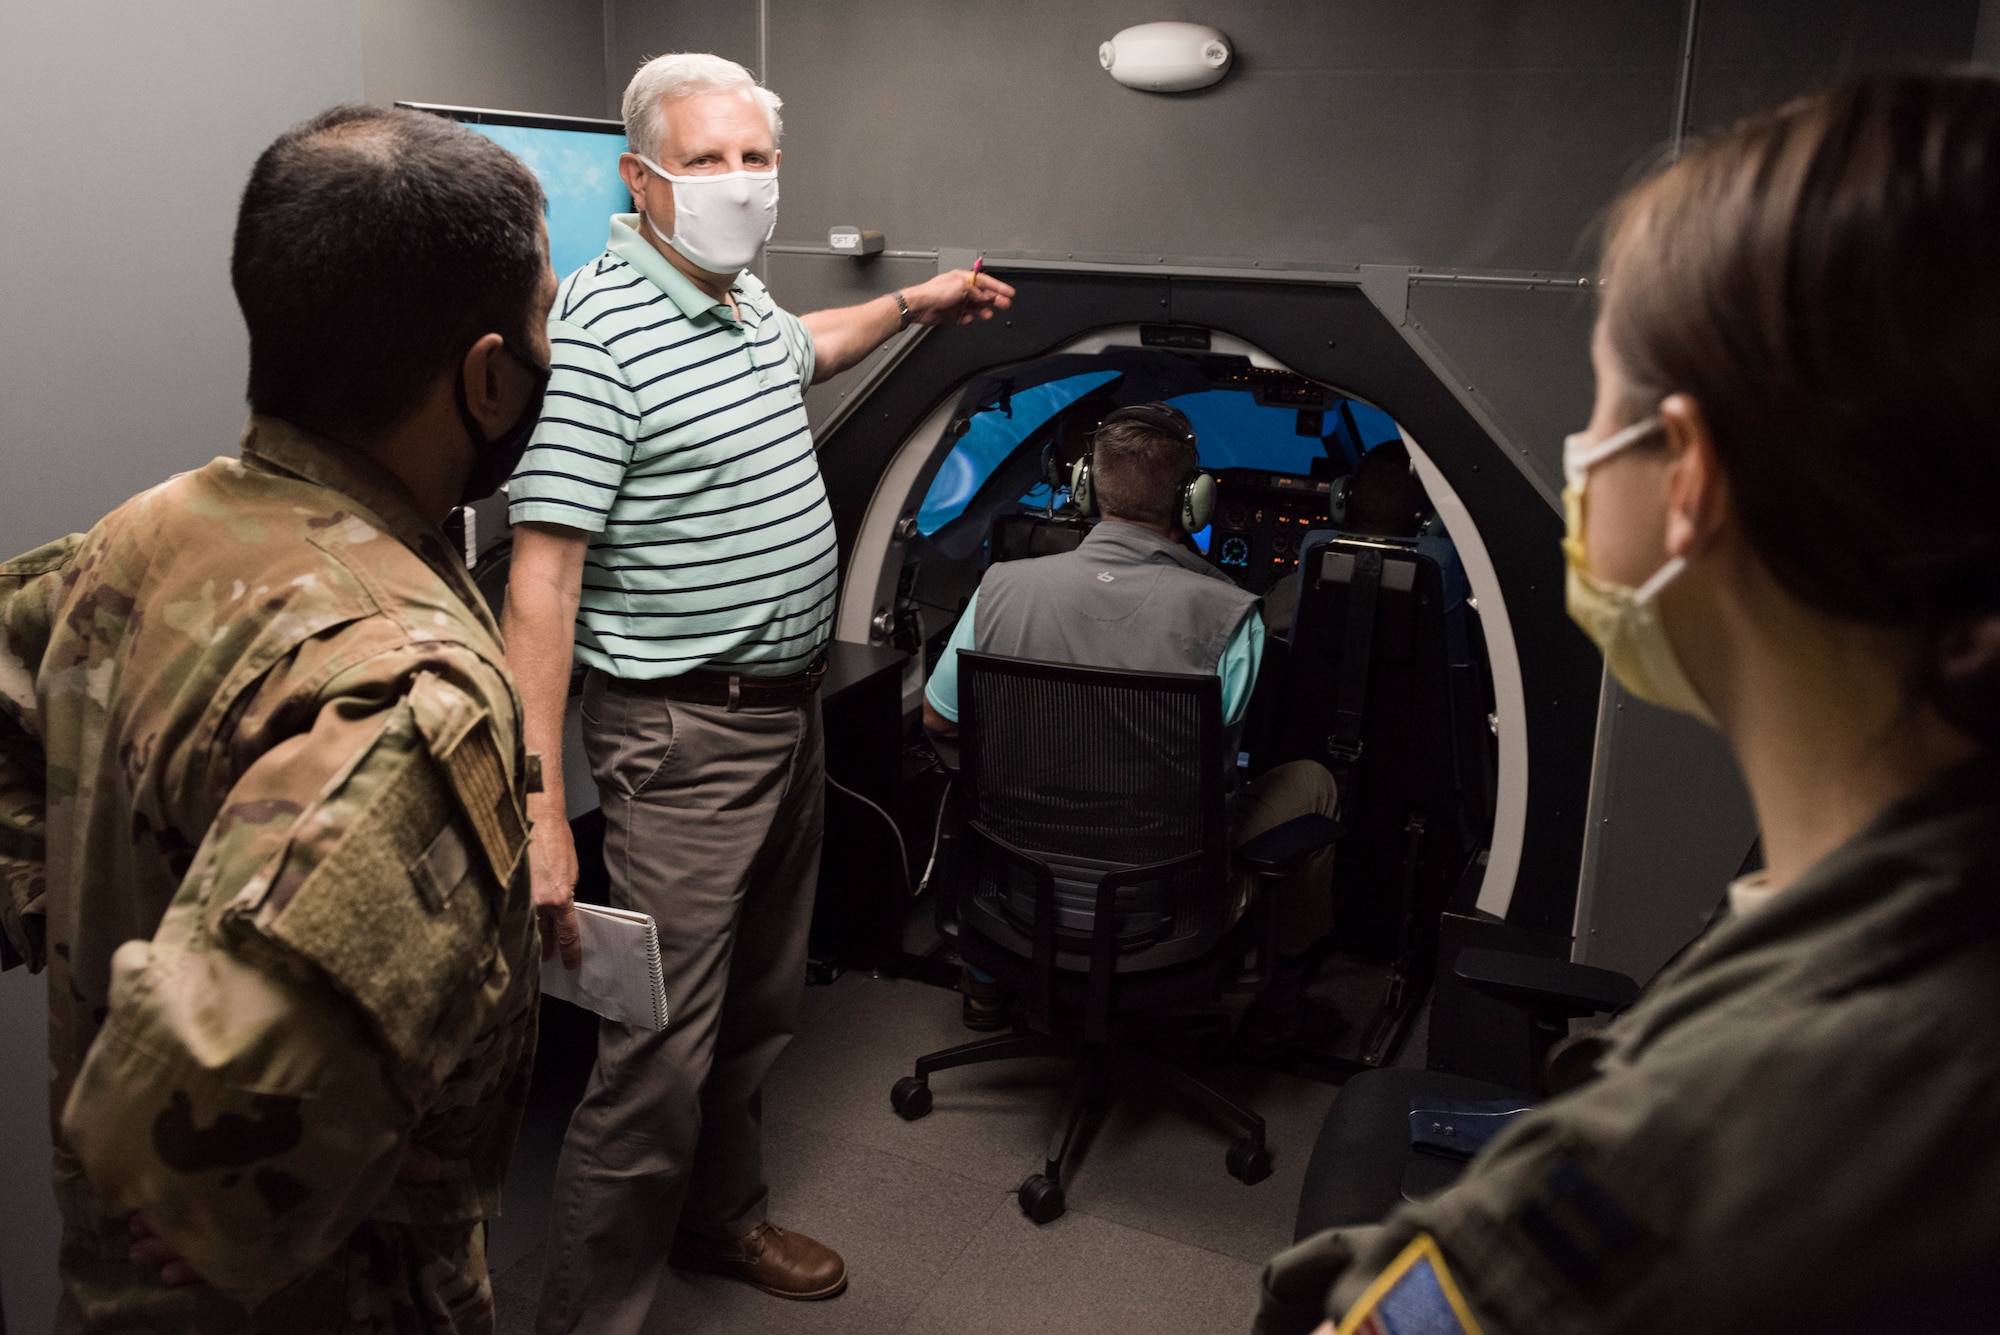 David Loftus, 47th Operations Group lead simulation instructor, demonstrates the tight quarters within the flight simulators to Lt. Col. Hafez Nasr, 47th Medical Group chief of aerospace medicine, and Capt. Susan Ching, 47th Flying Training Wing public health emergency officer,, Aug. 6, 2020 at Laughlin Air Force Base, Texas. The 47th Operations Group plans to purchase face shields for simulation instructors and provide them with latex gloves to prevent as much contact on the higher-contact surfaces. (U.S. Air Force photo by Senior Airman Anne McCready)